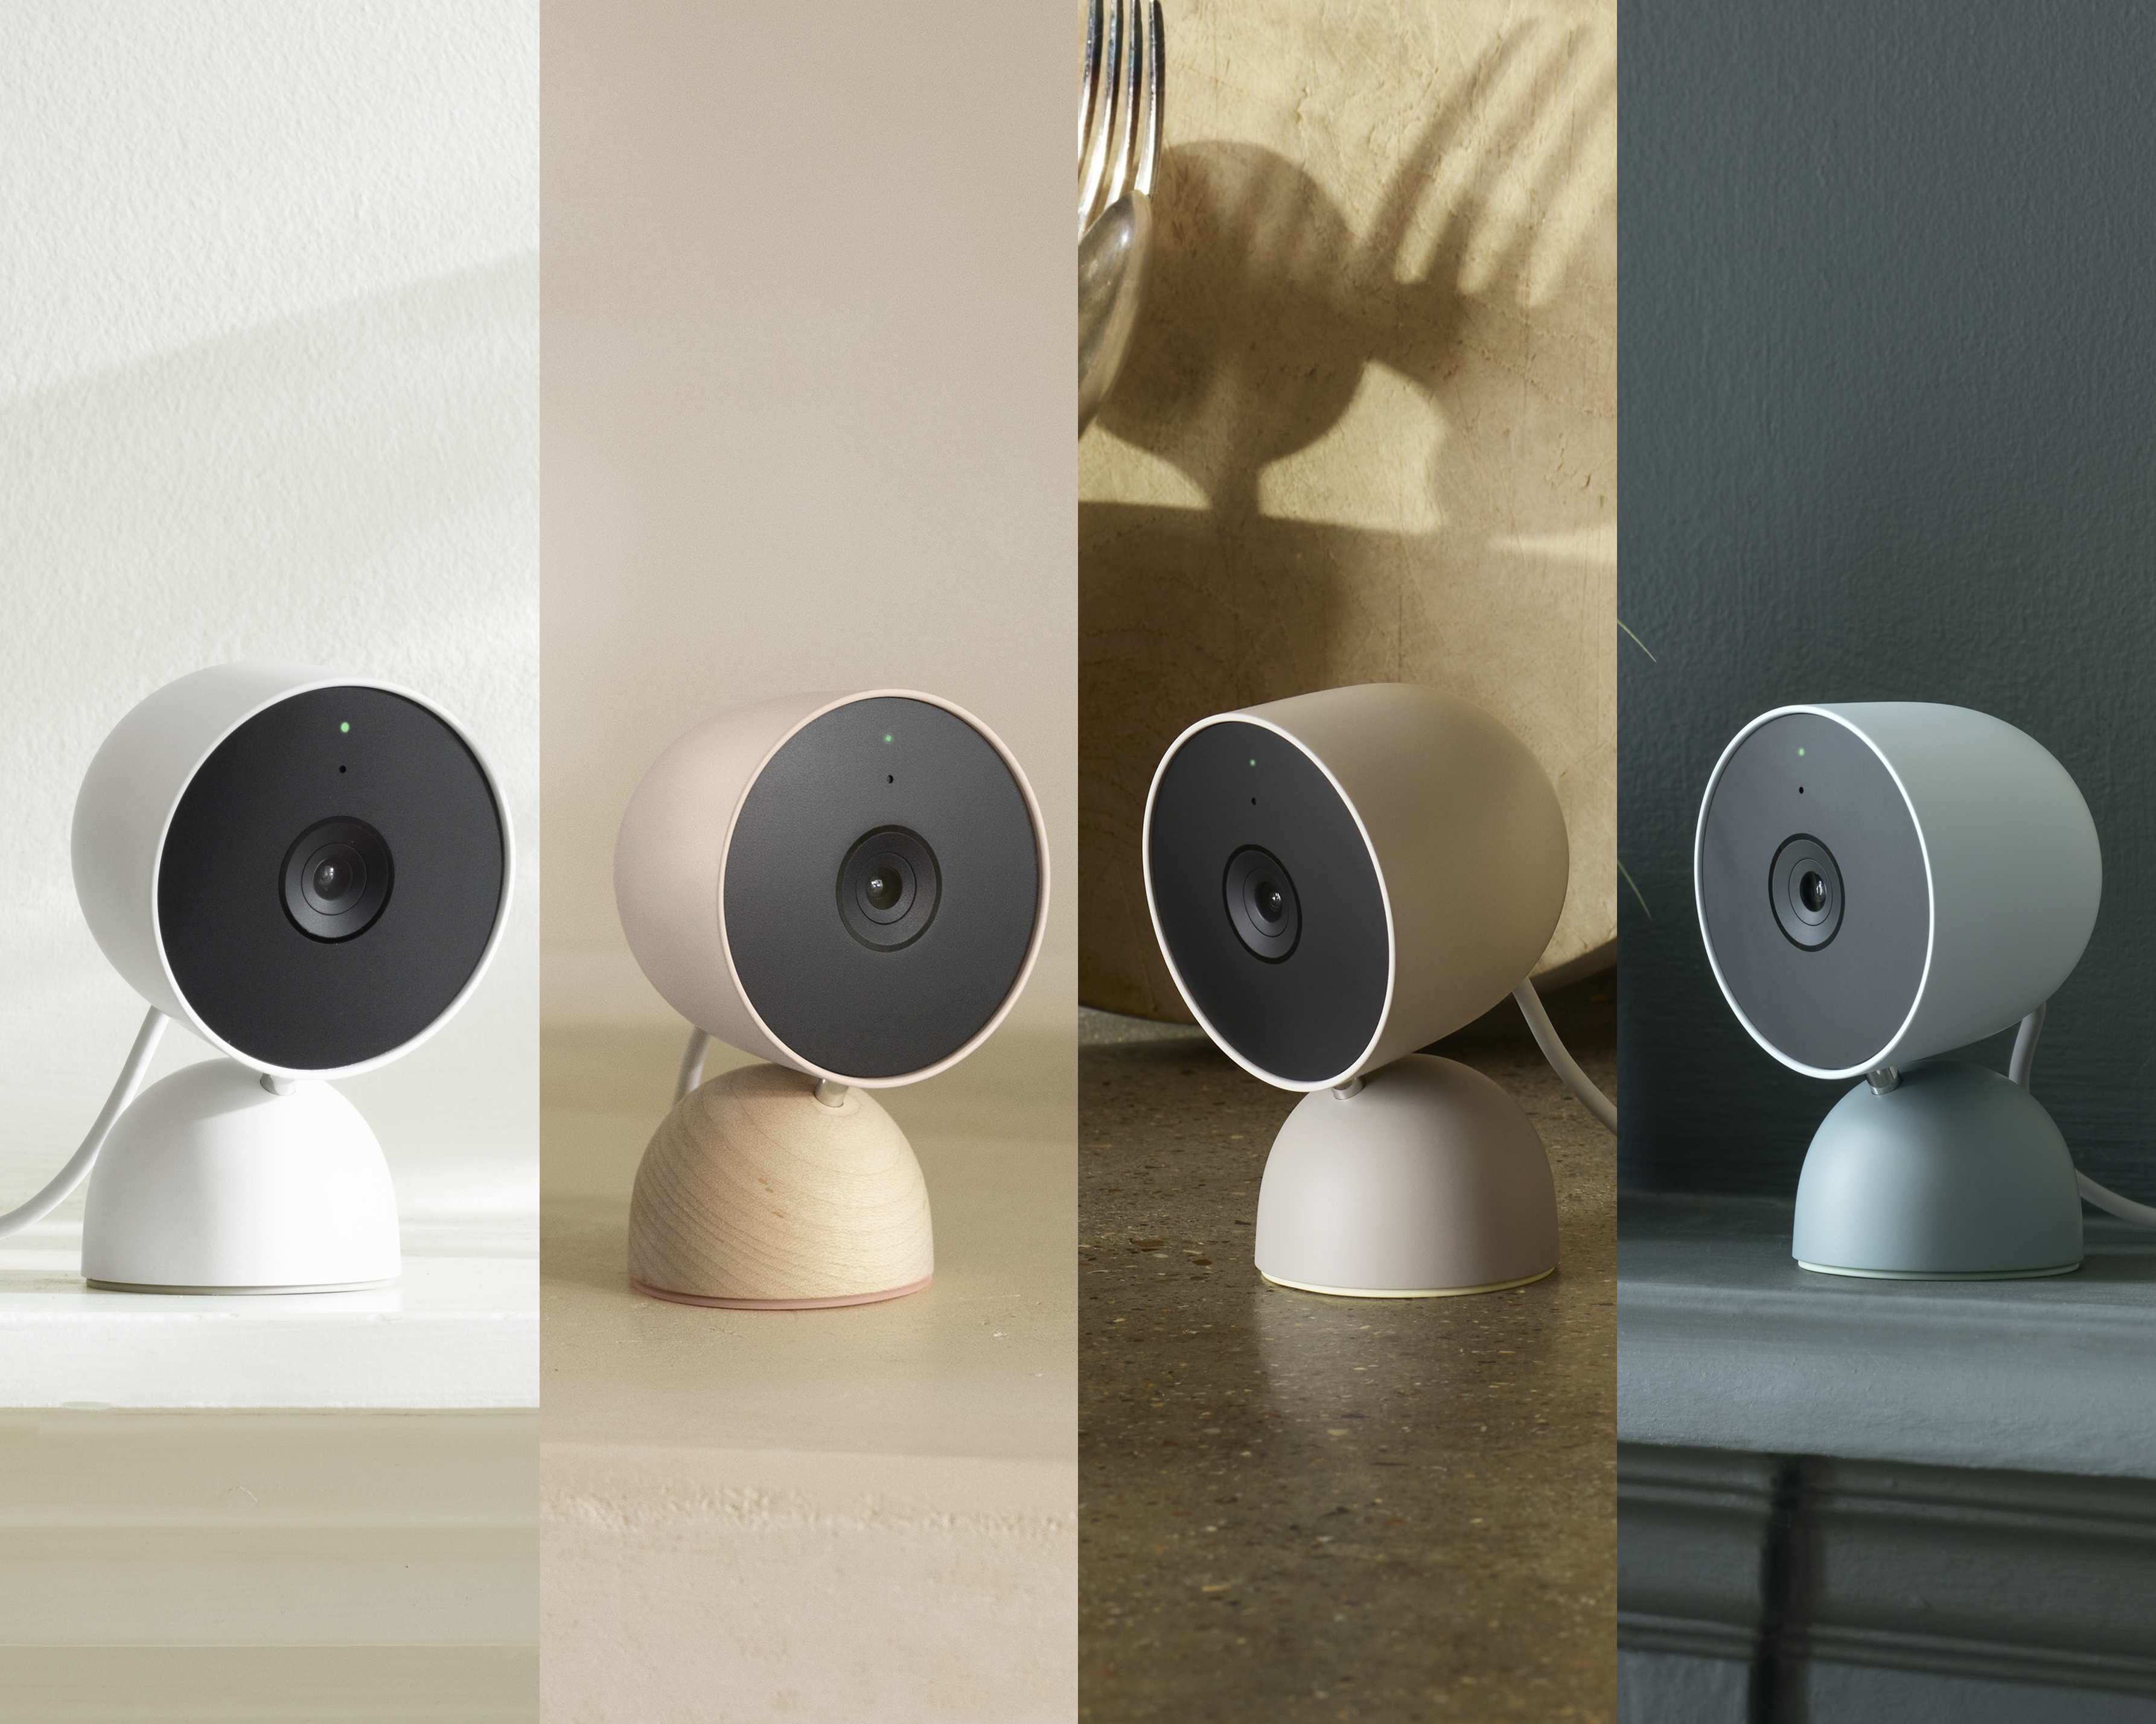 The new Nest Cam (indoor, wired) is here